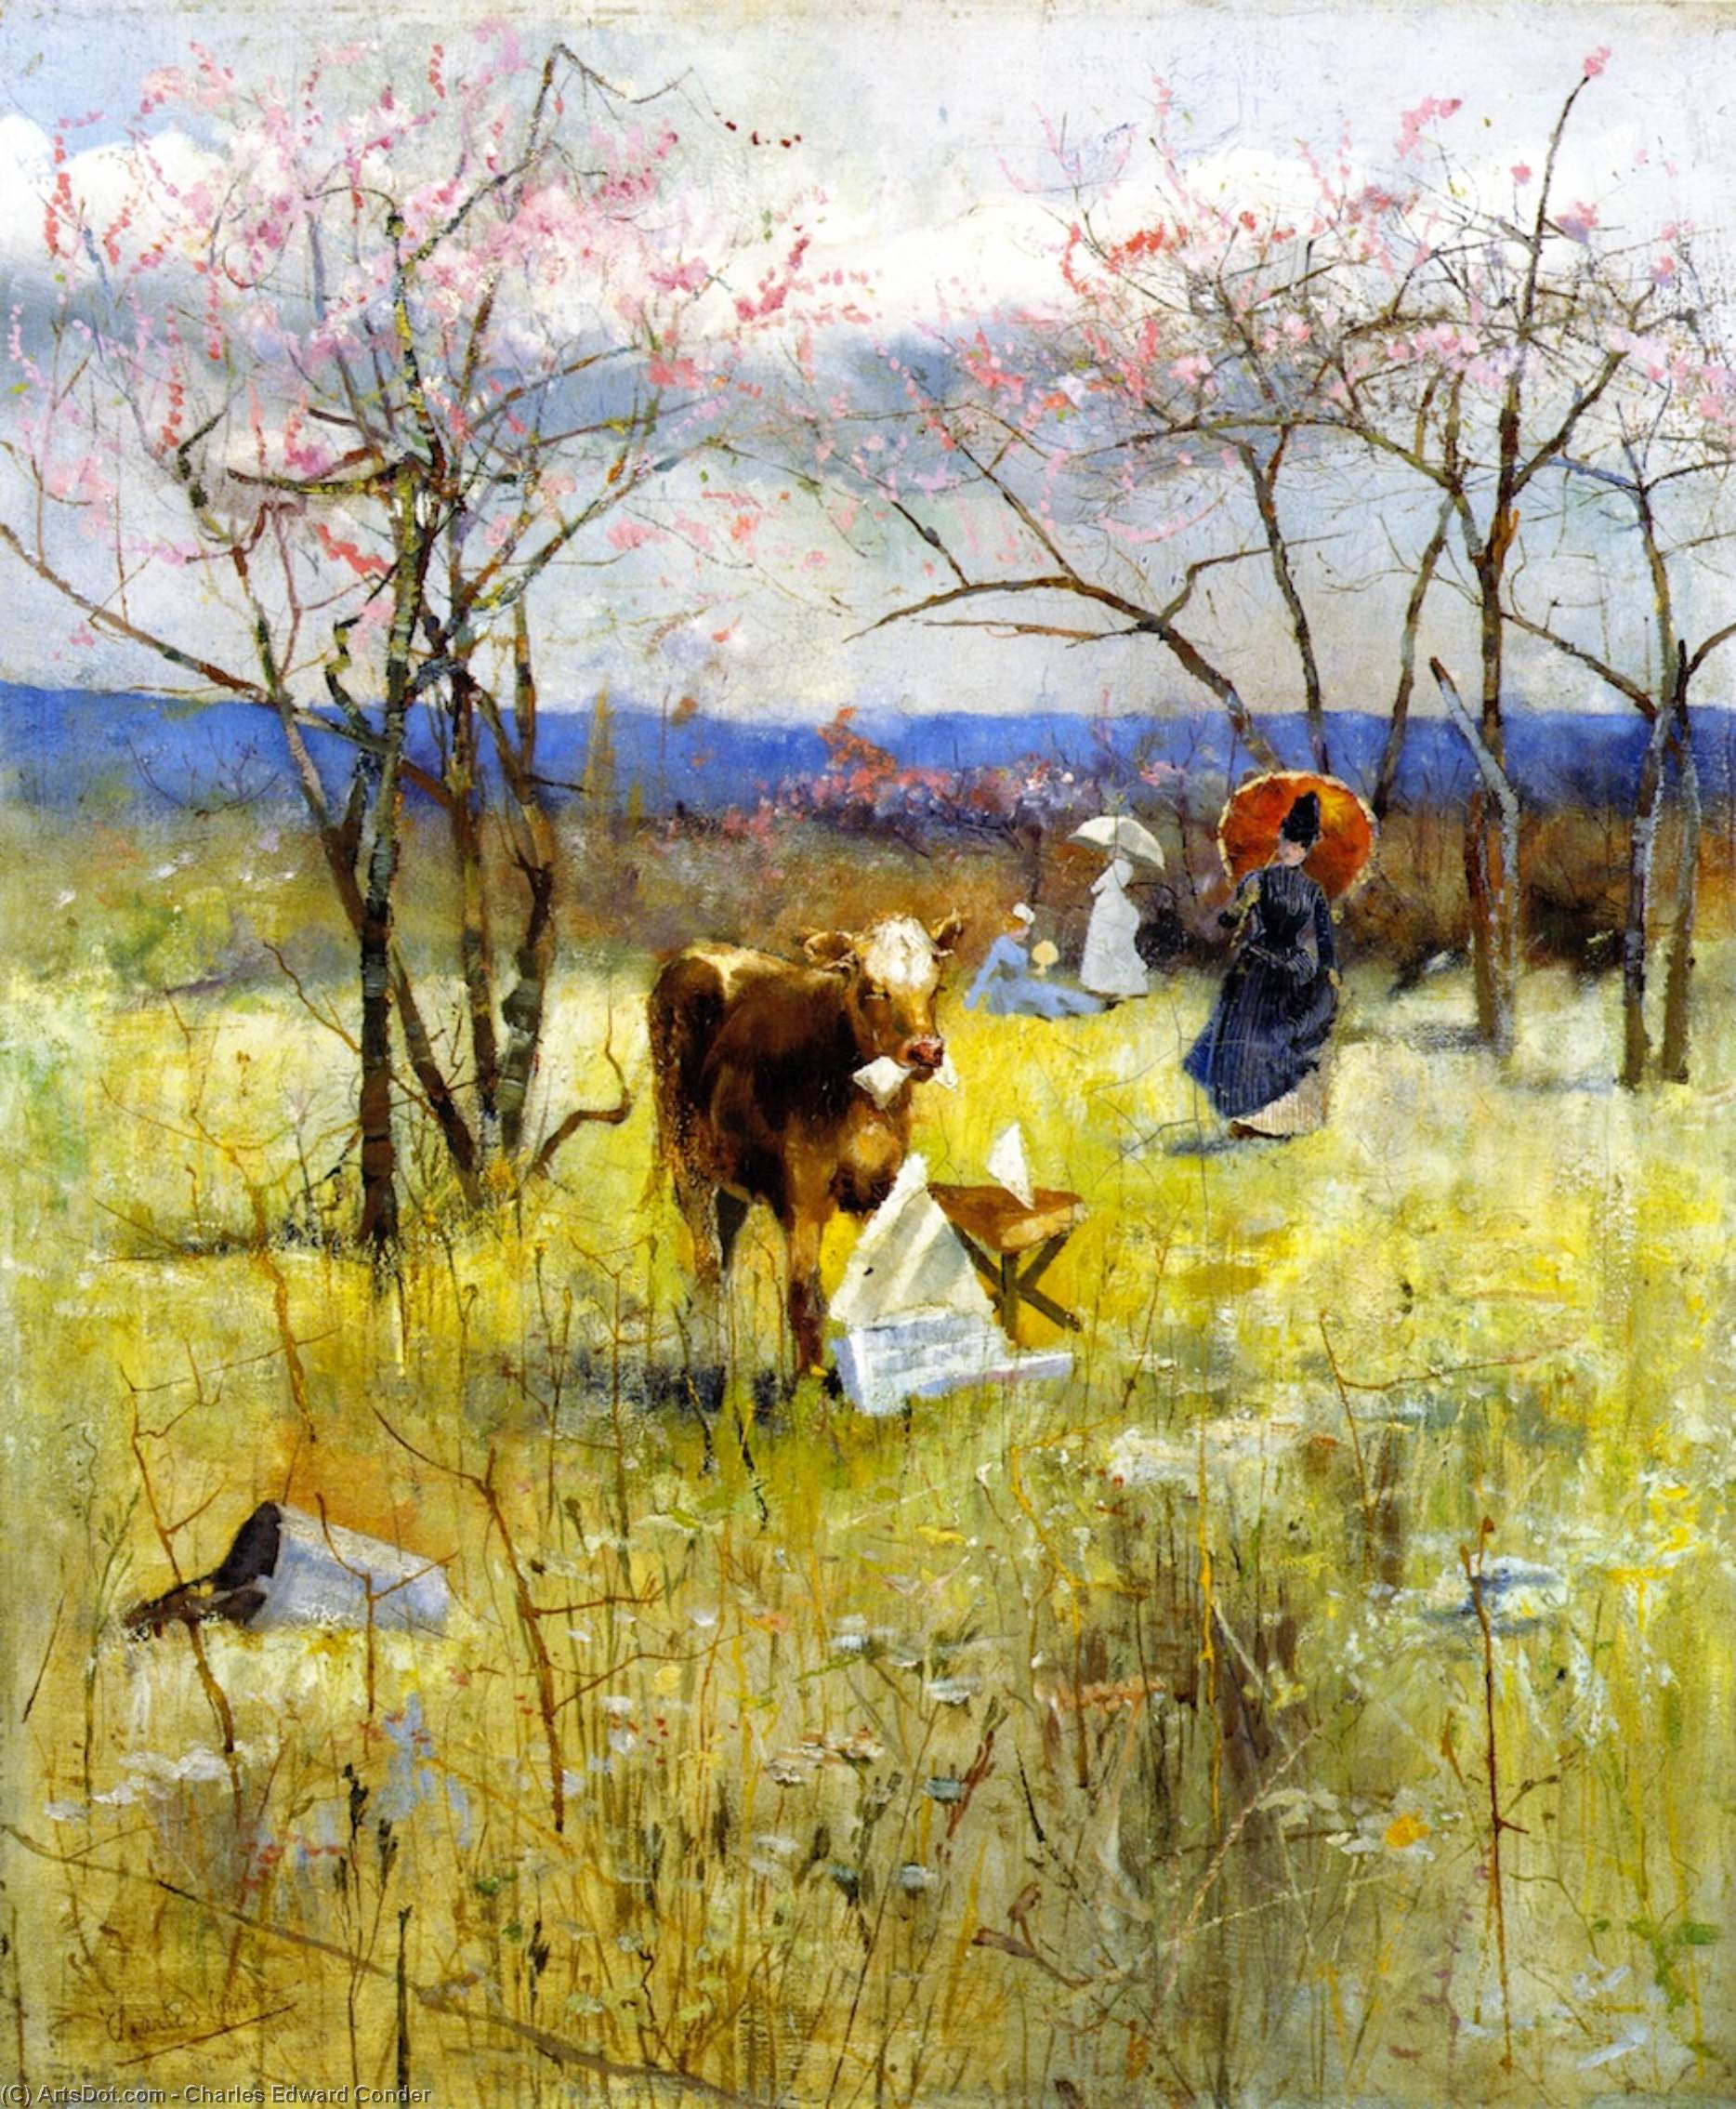 Buy Museum Art Reproductions A Taste for Literature, 1888 by Charles Edward Conder (1868-1909, United Kingdom) | ArtsDot.com